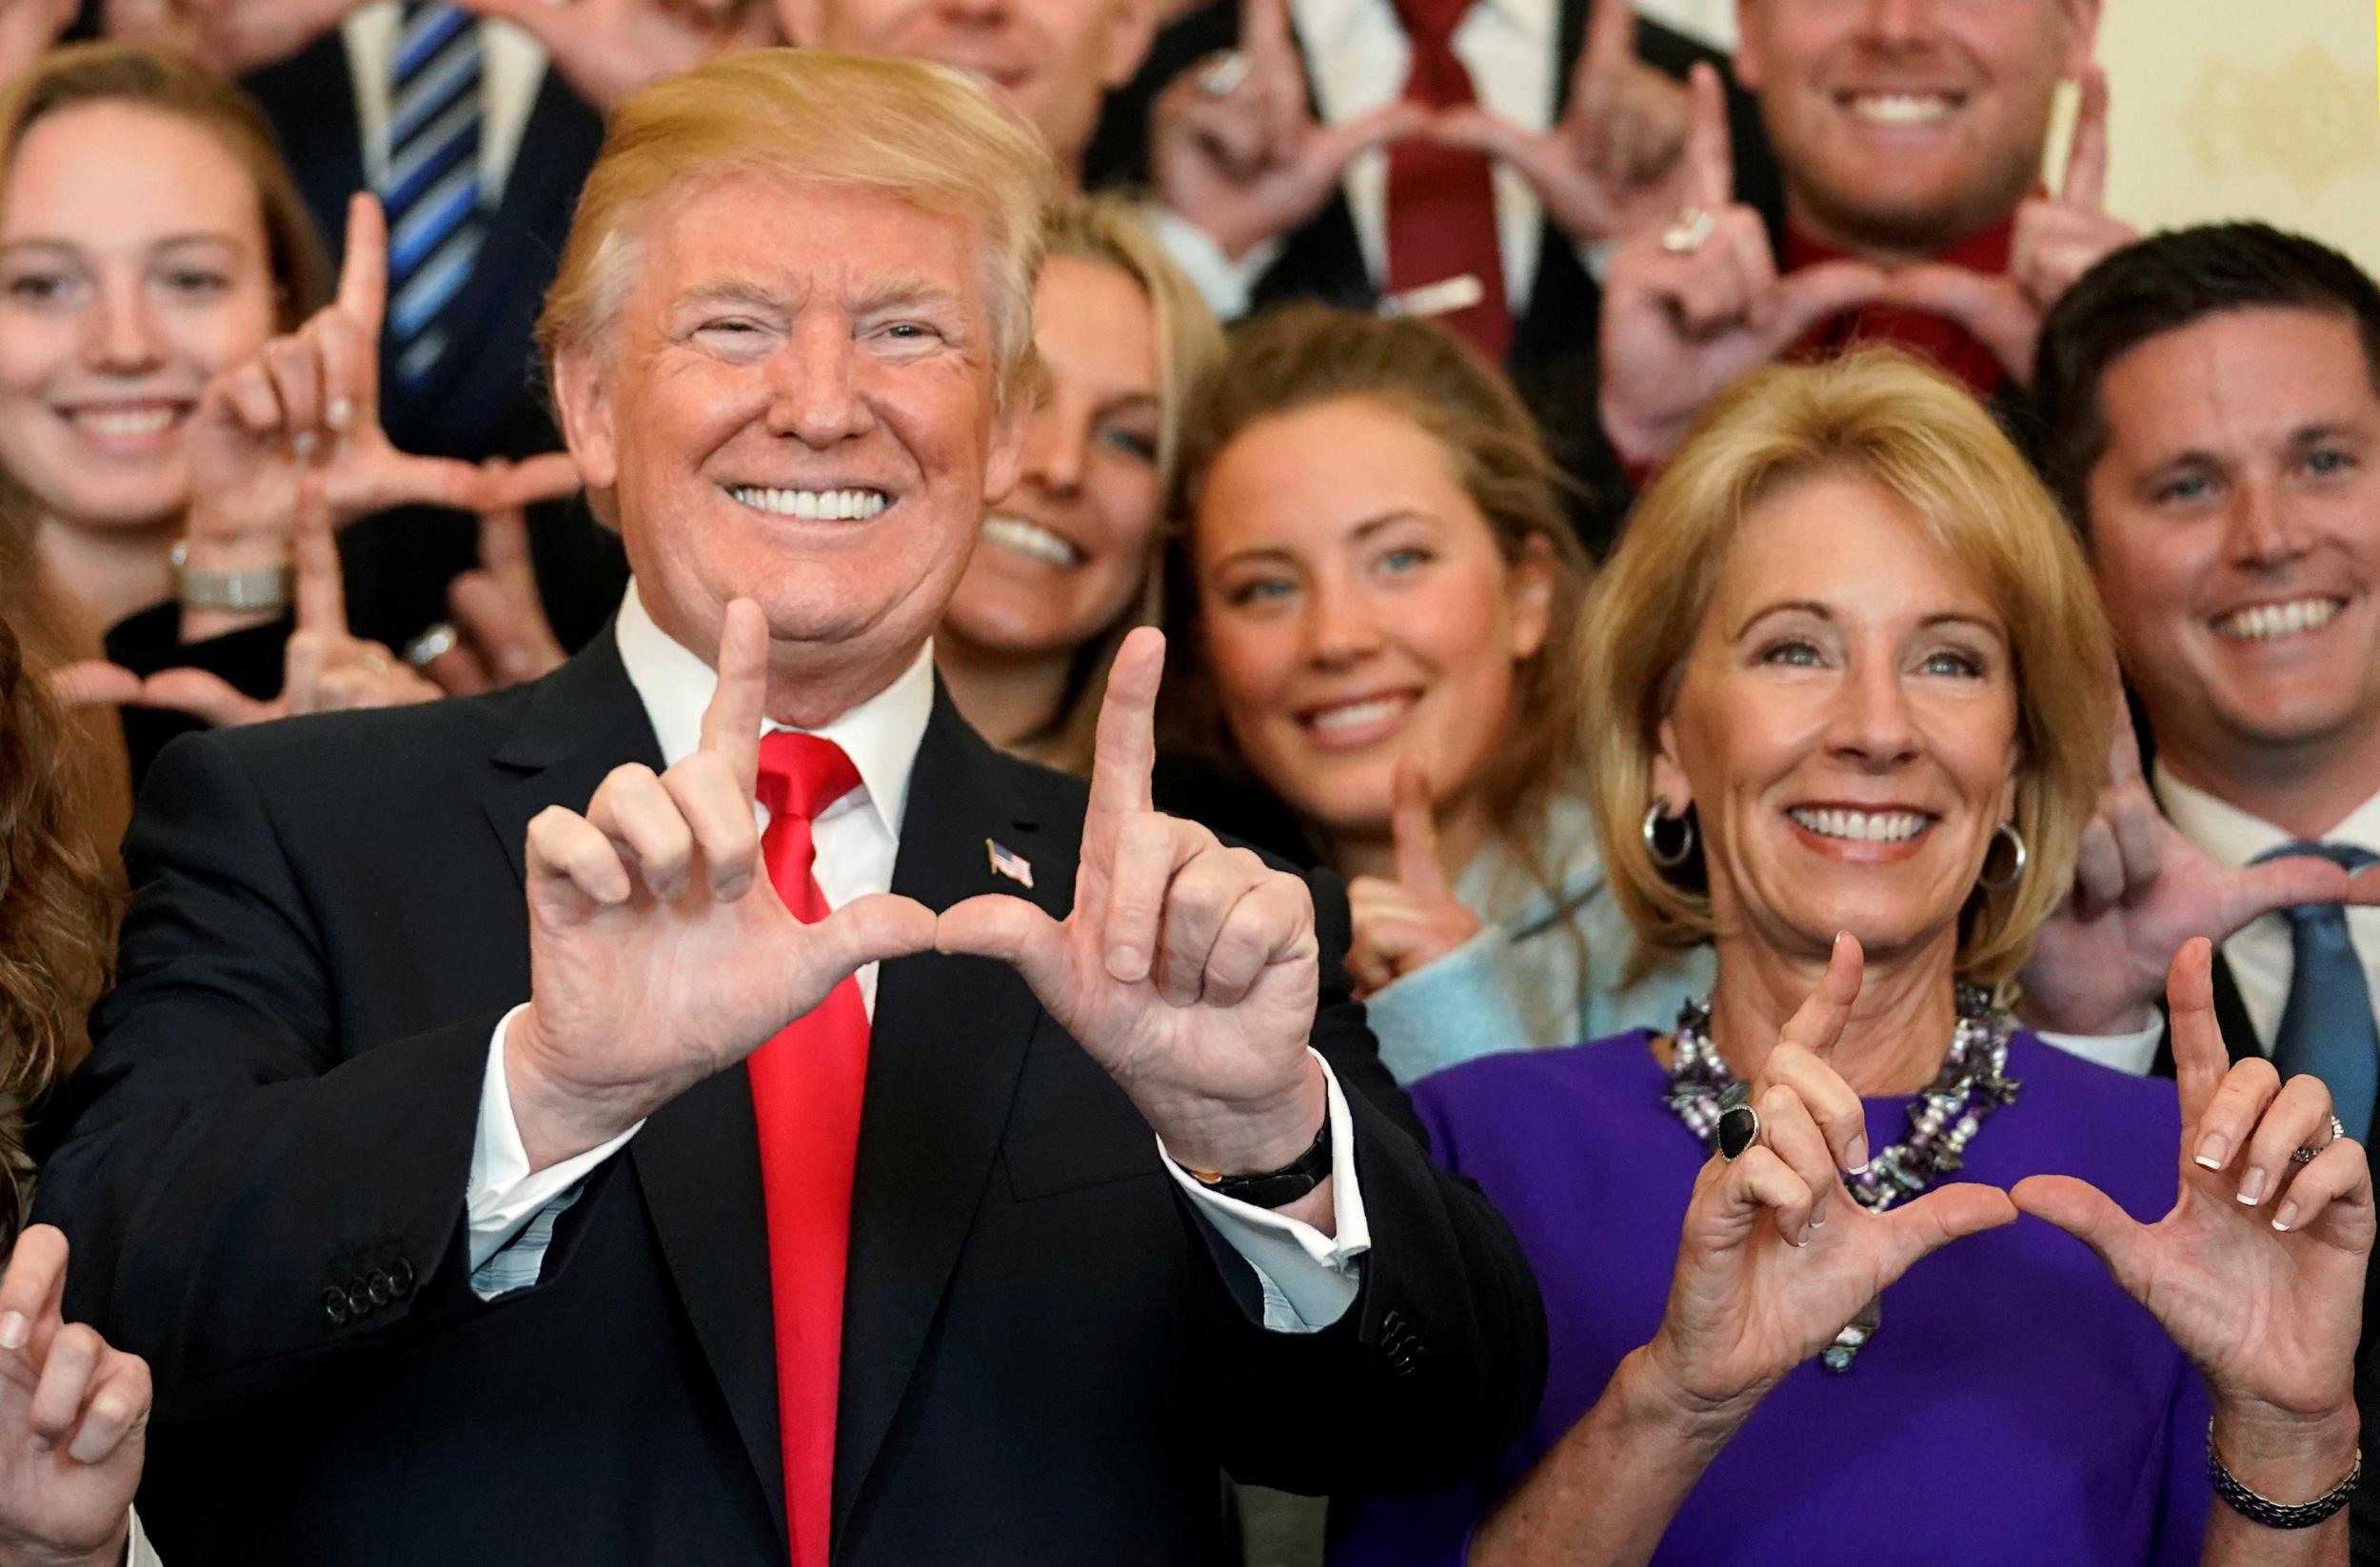 President Donald Trump and Education Secretary Betsy DeVos make "U" symbols with their hands while posing with the Utah Skiing team